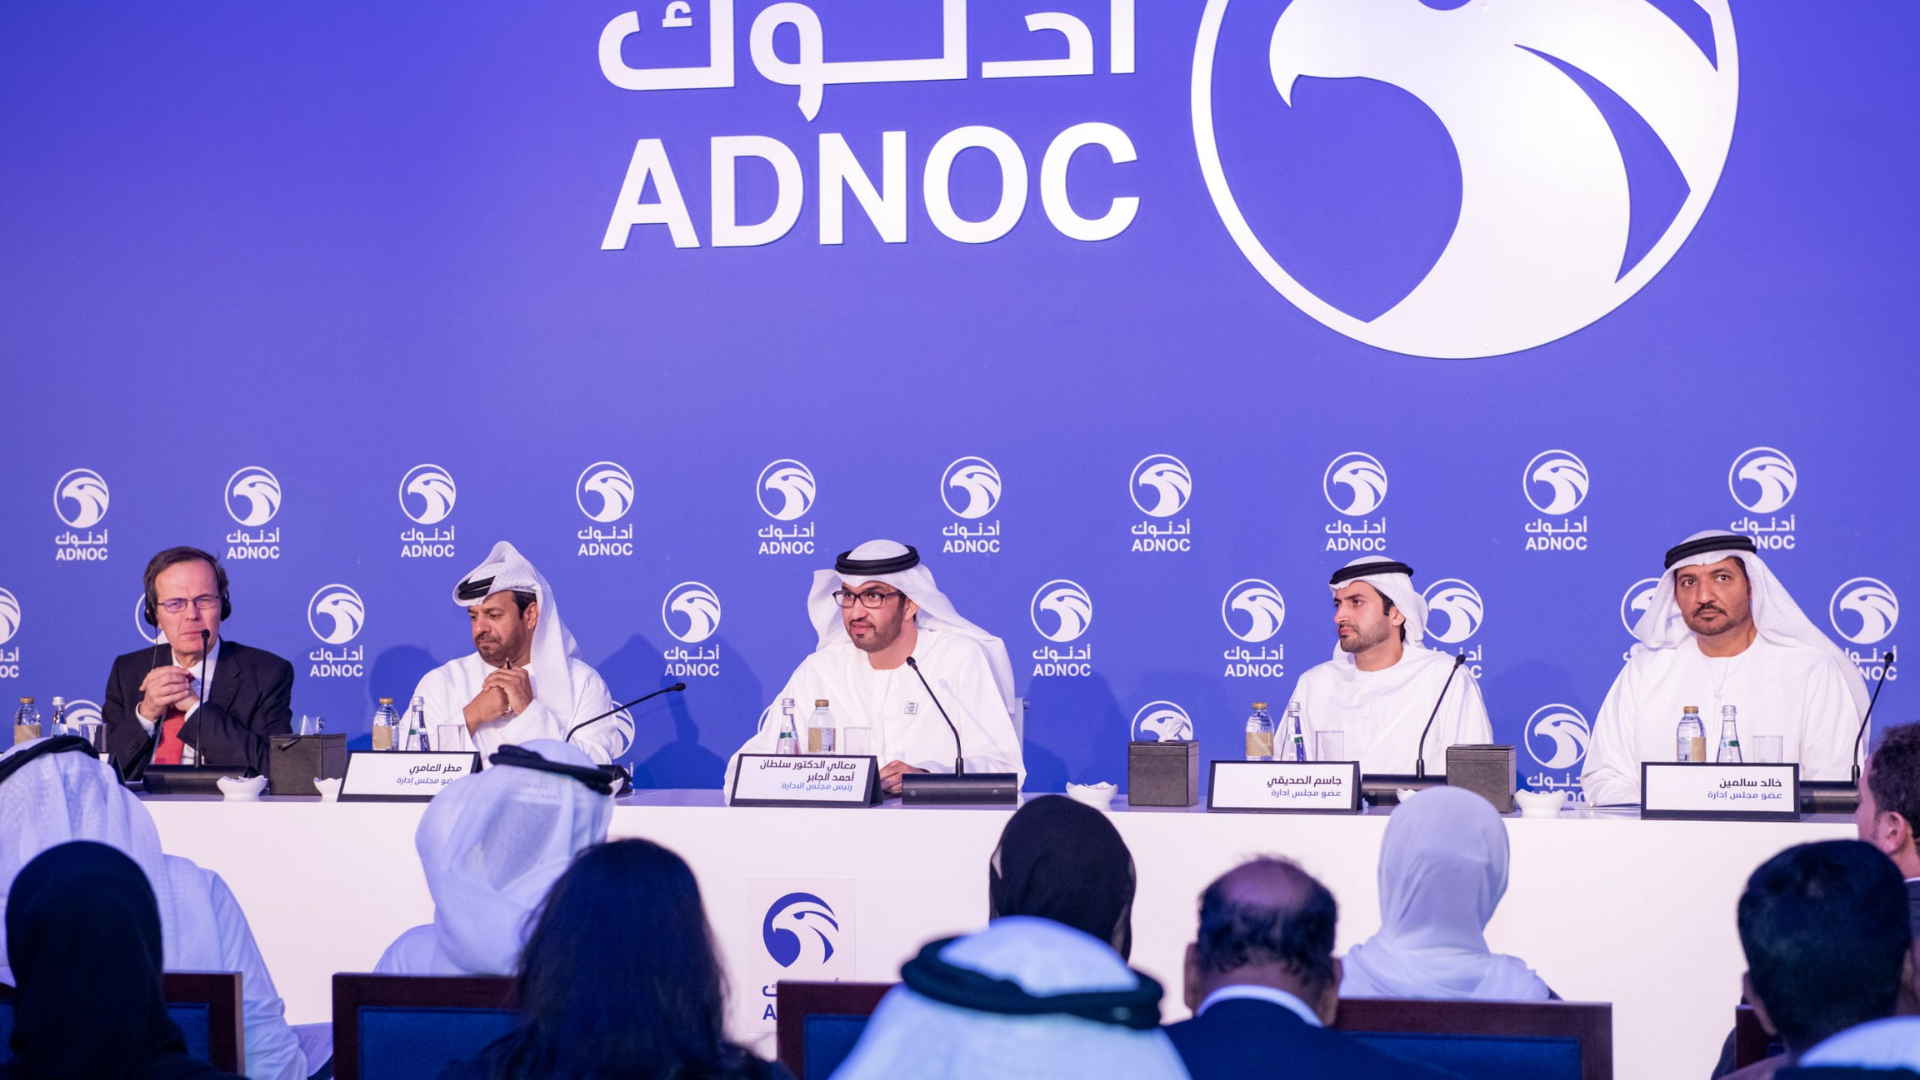 ADNOC Approved Laboratory 